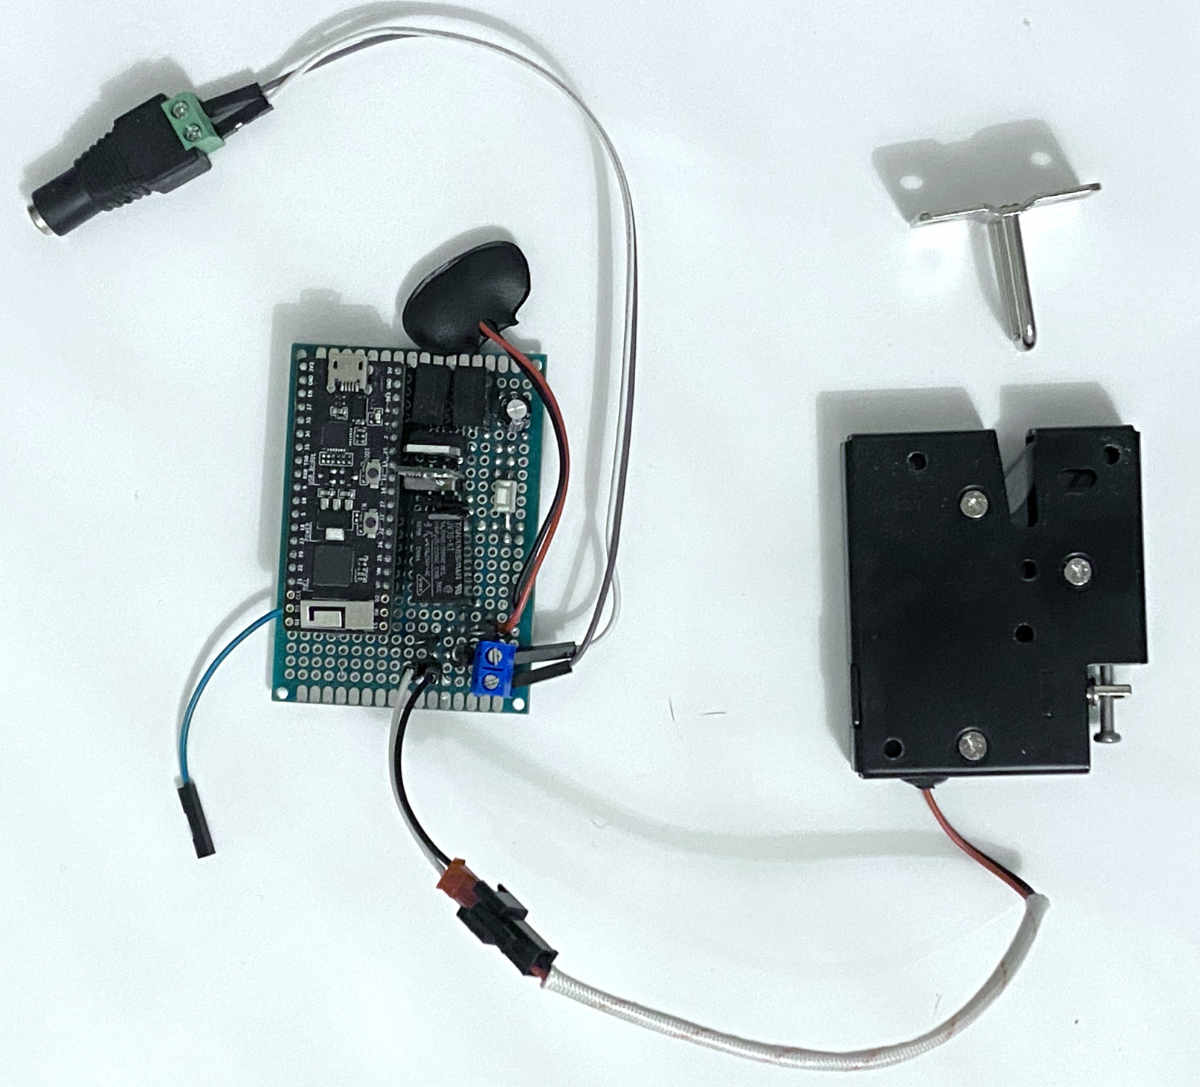 Image of the POW Lock showing the ESP32, power conditioning electronics and relay, as well as the electronic latch